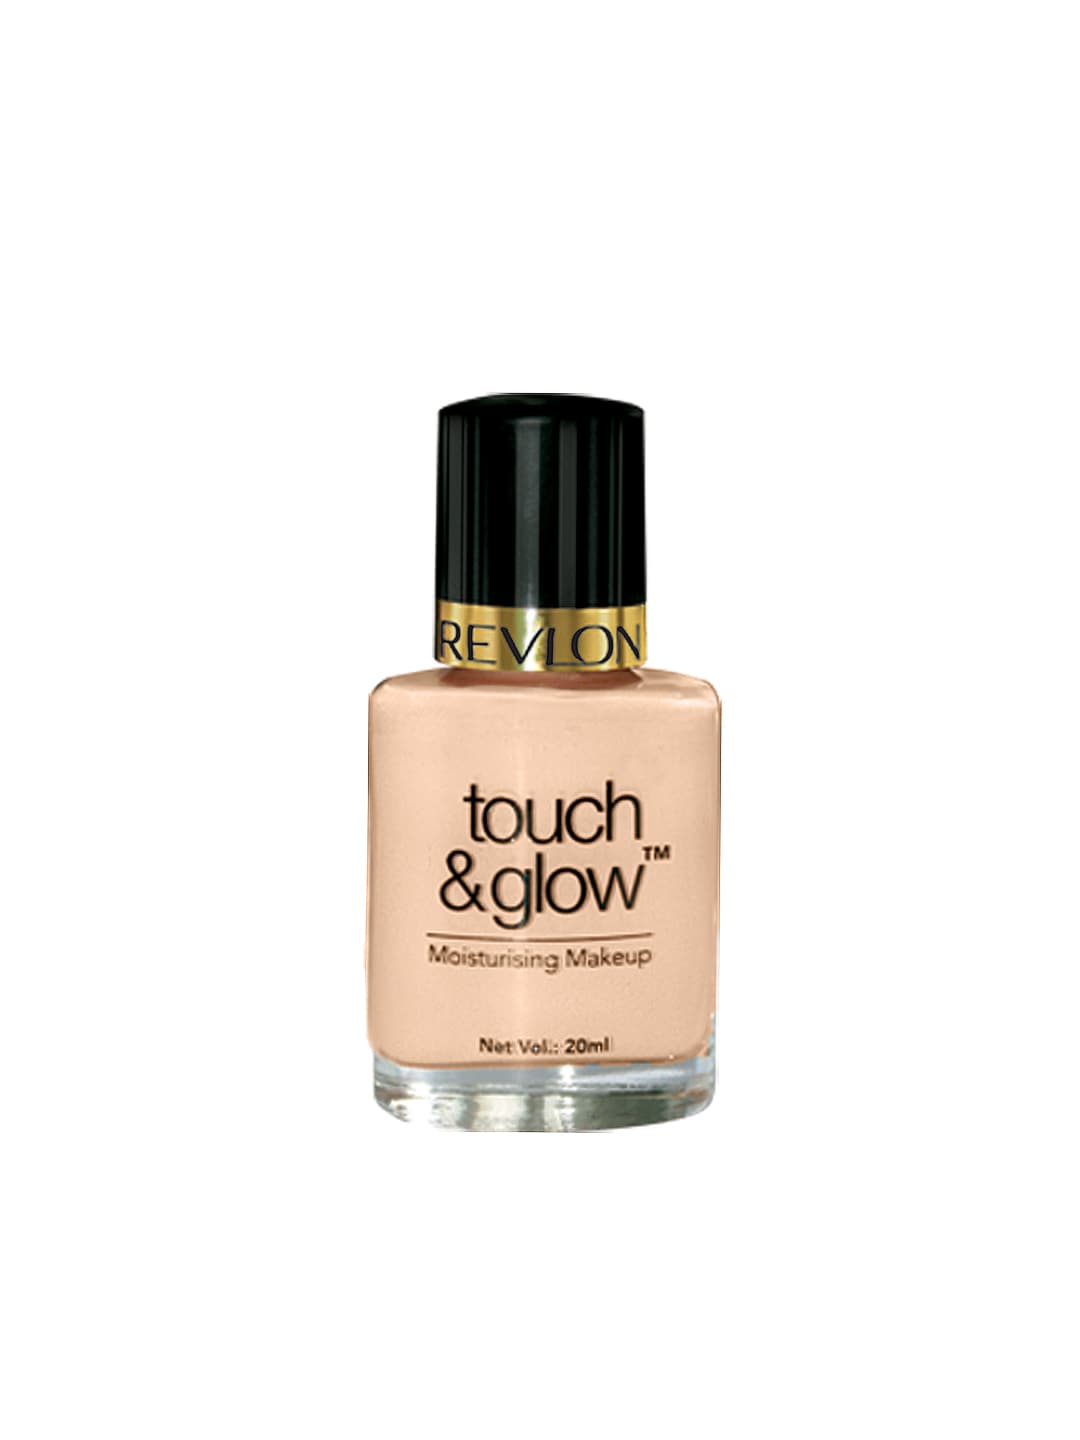 Revlon Touch And Glow Natural Mist Moisturising Make up 09